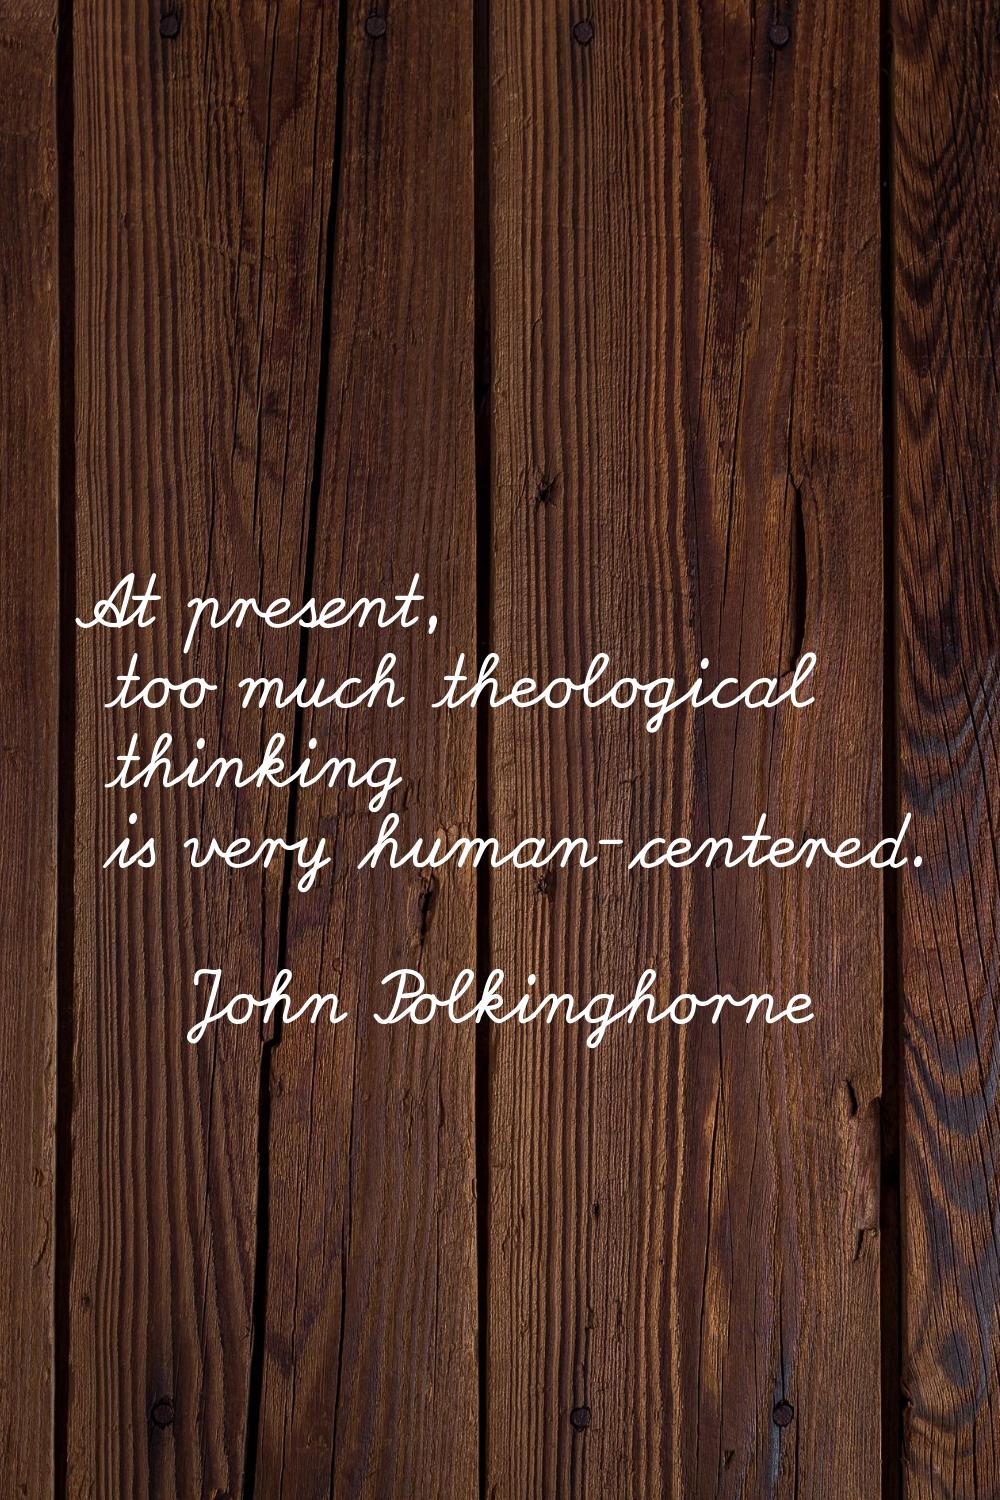 At present, too much theological thinking is very human-centered.